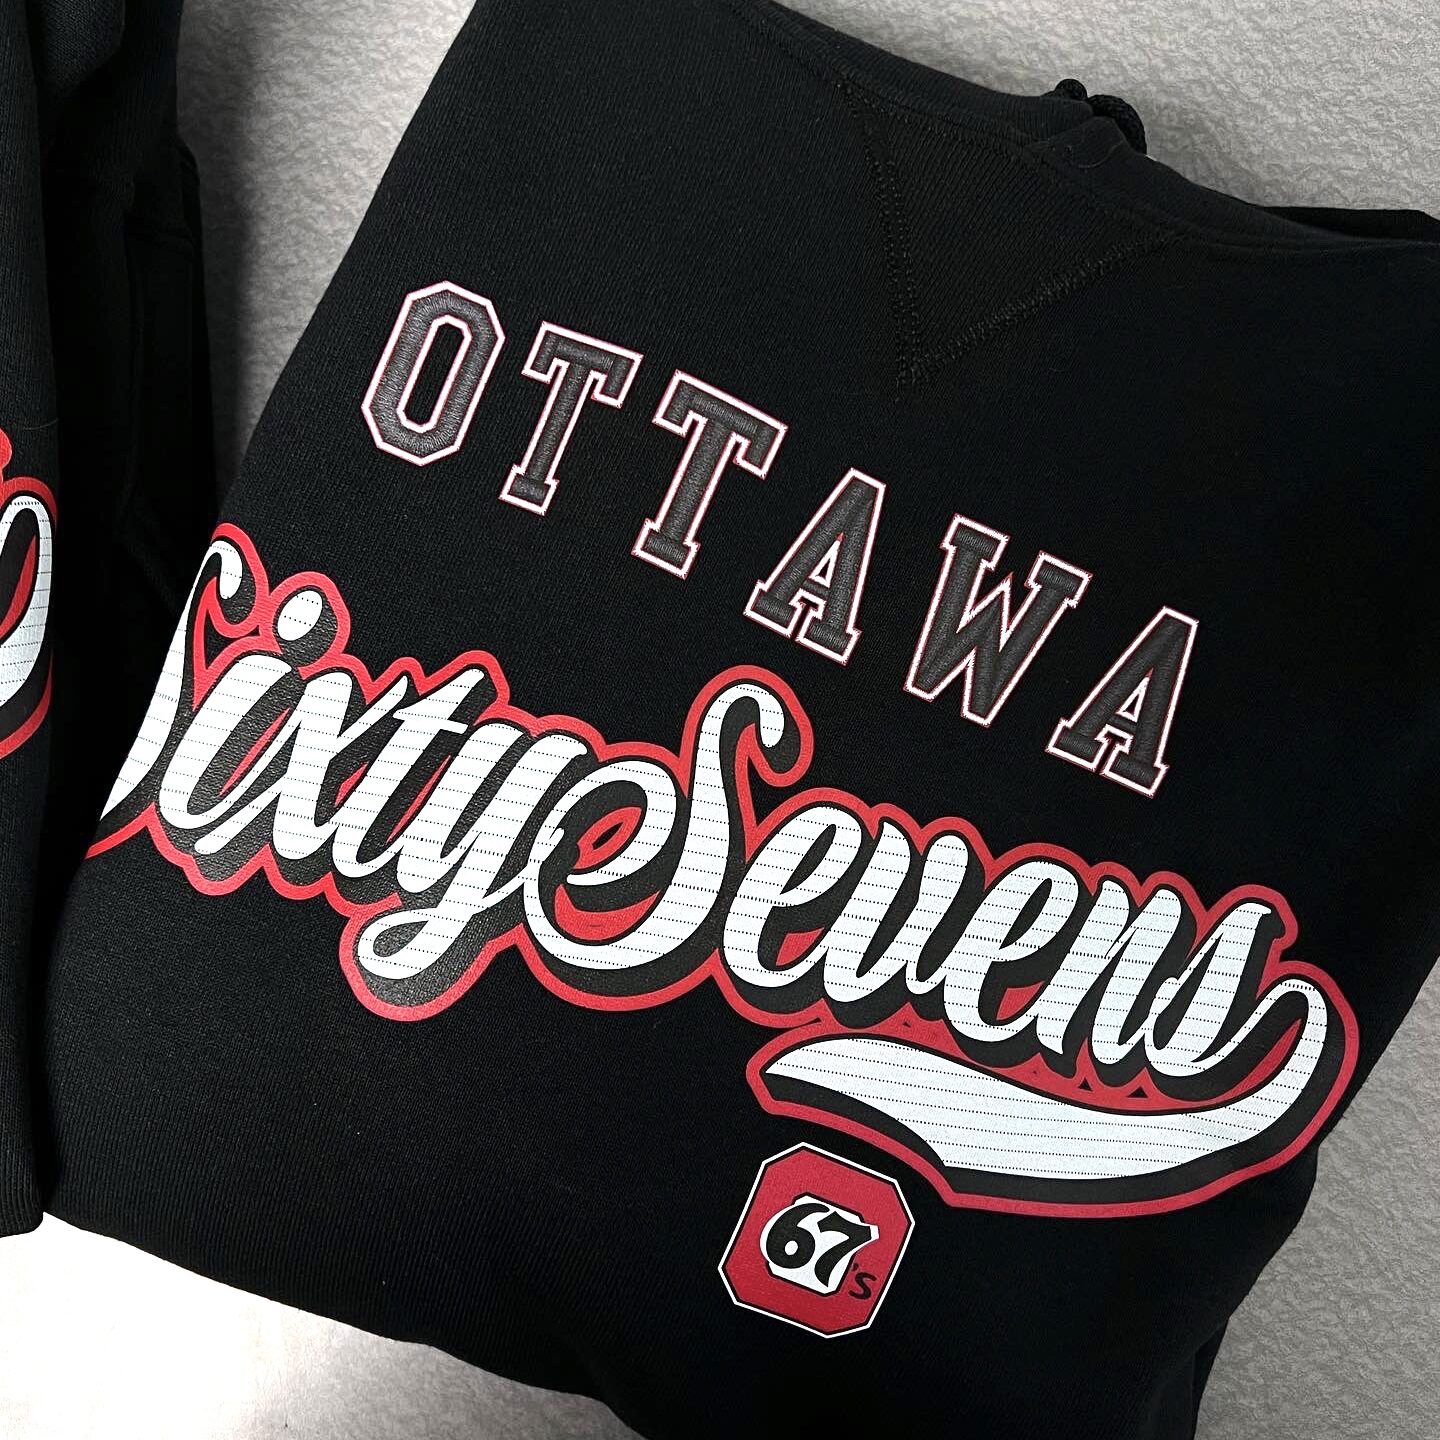 New player gear for the Ottawa 67s